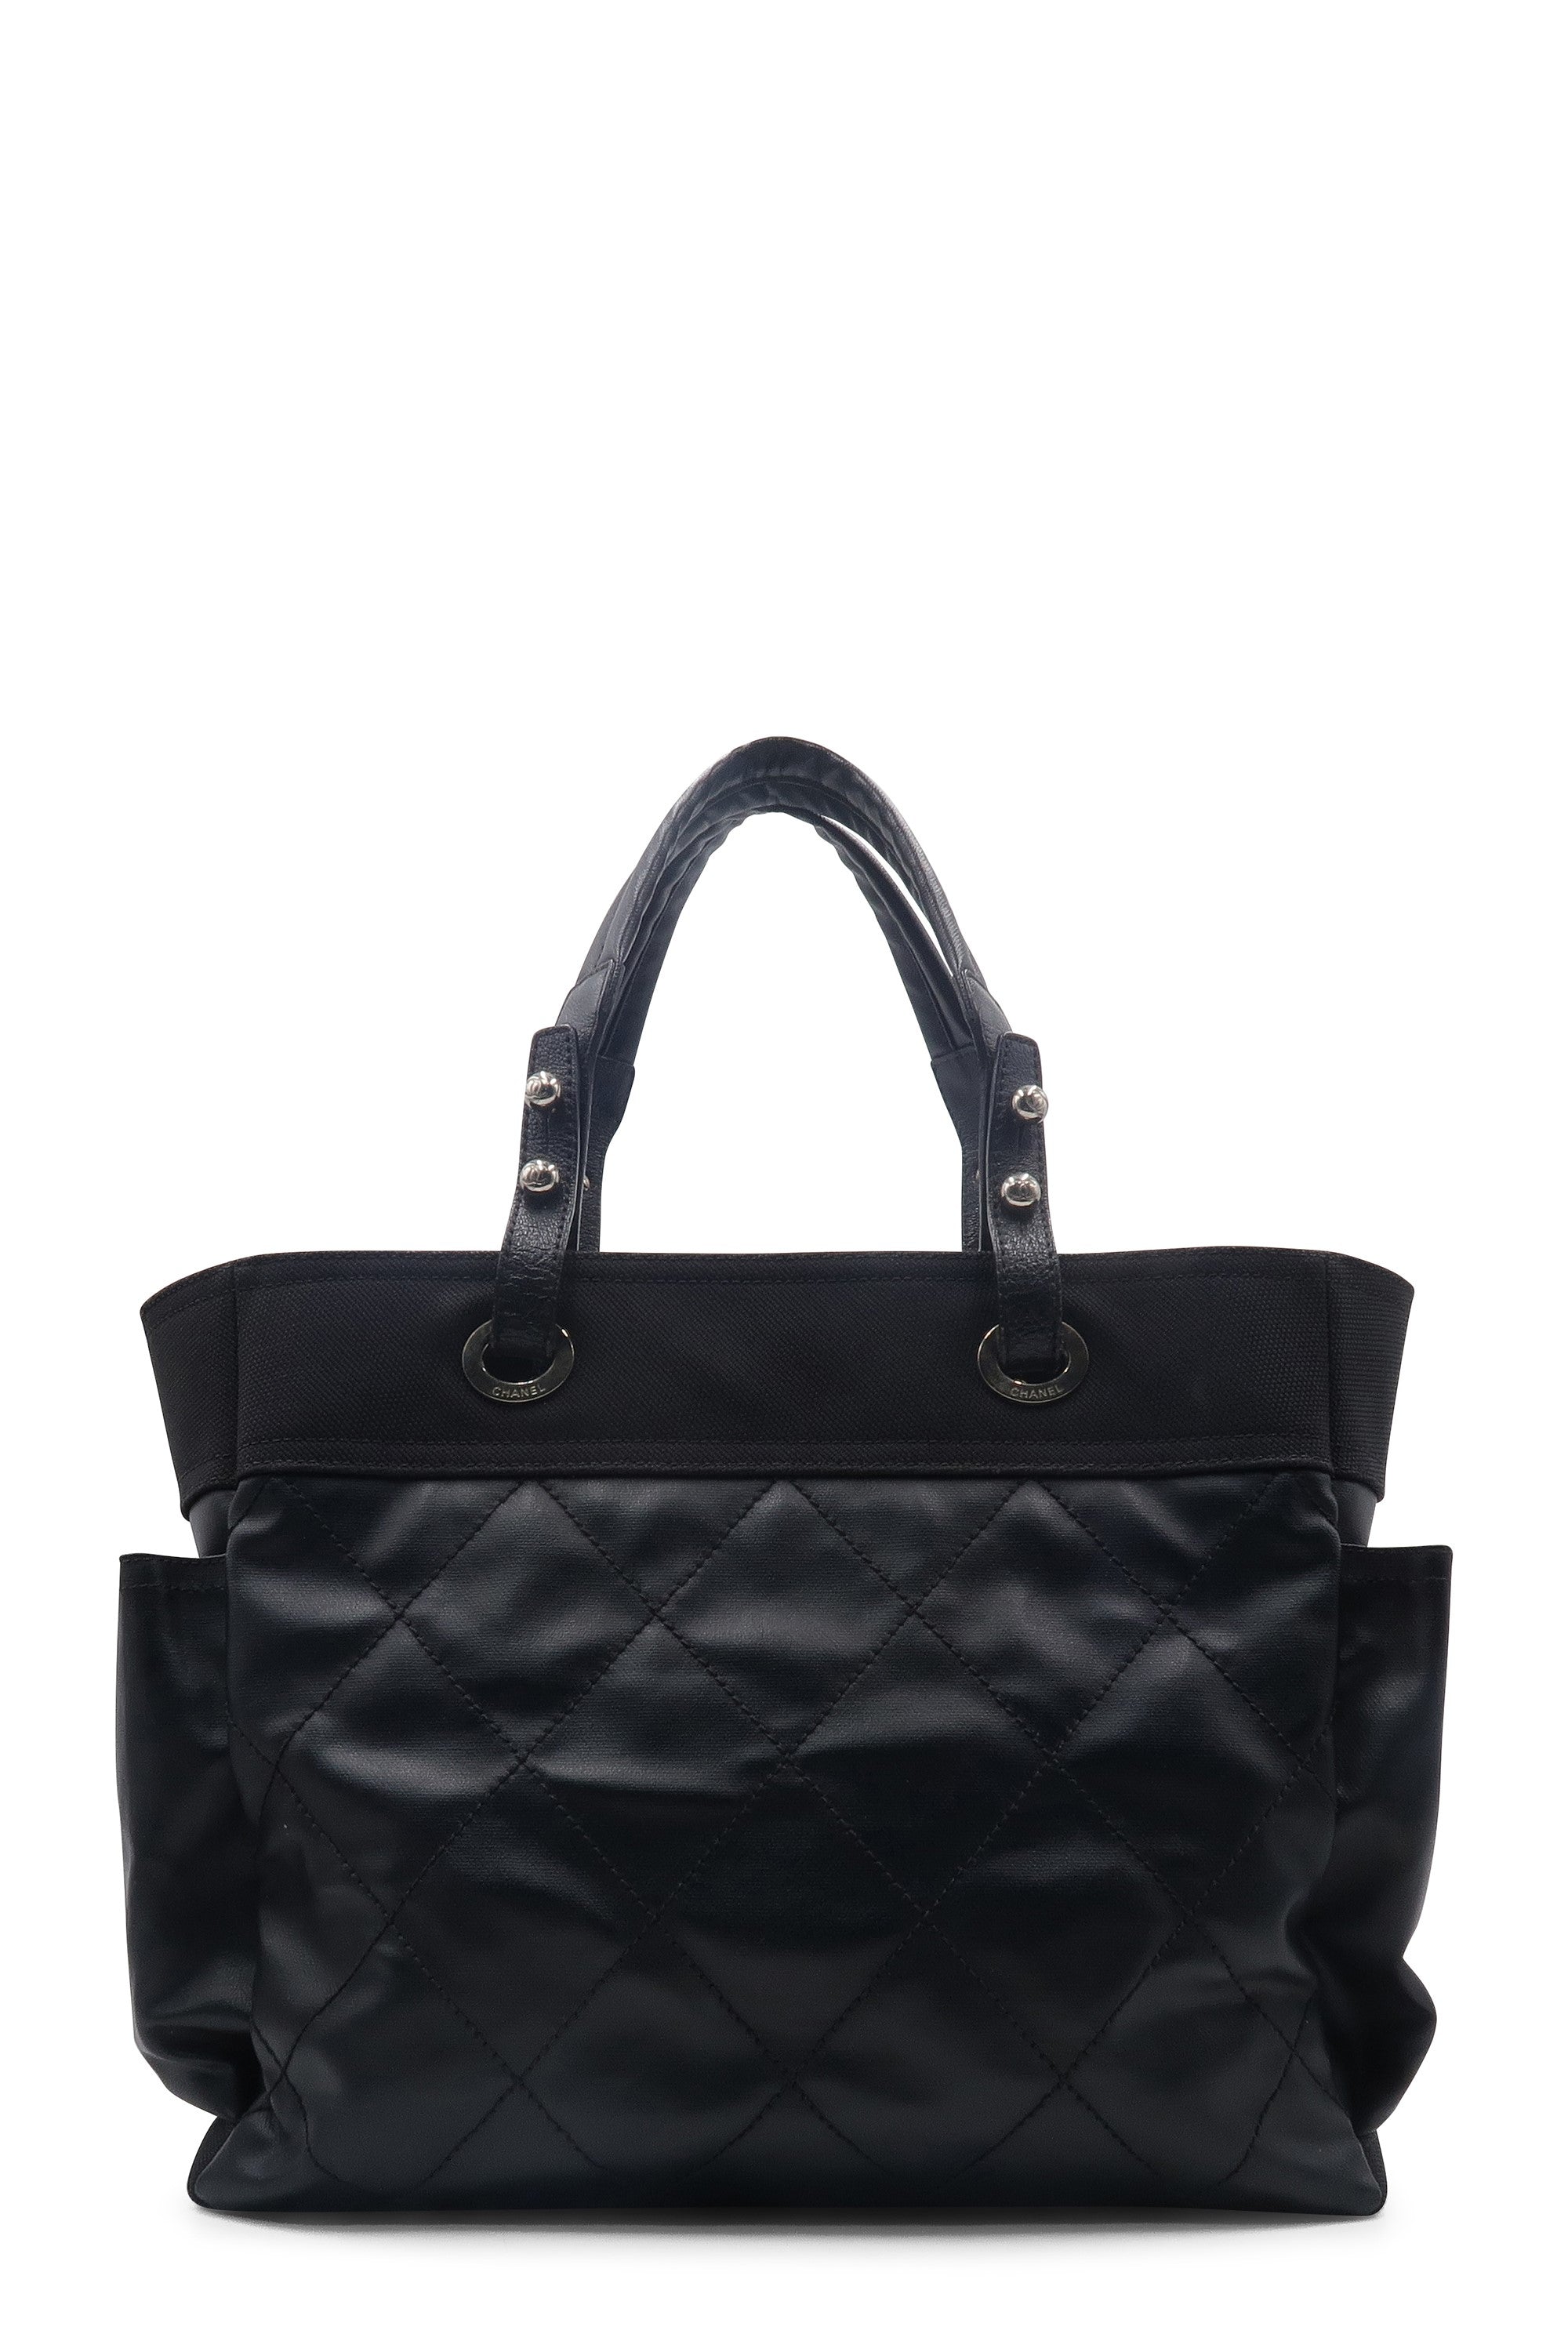 Buy Authentic, Preloved Chanel Paris Biarritz Shopping Tote Black